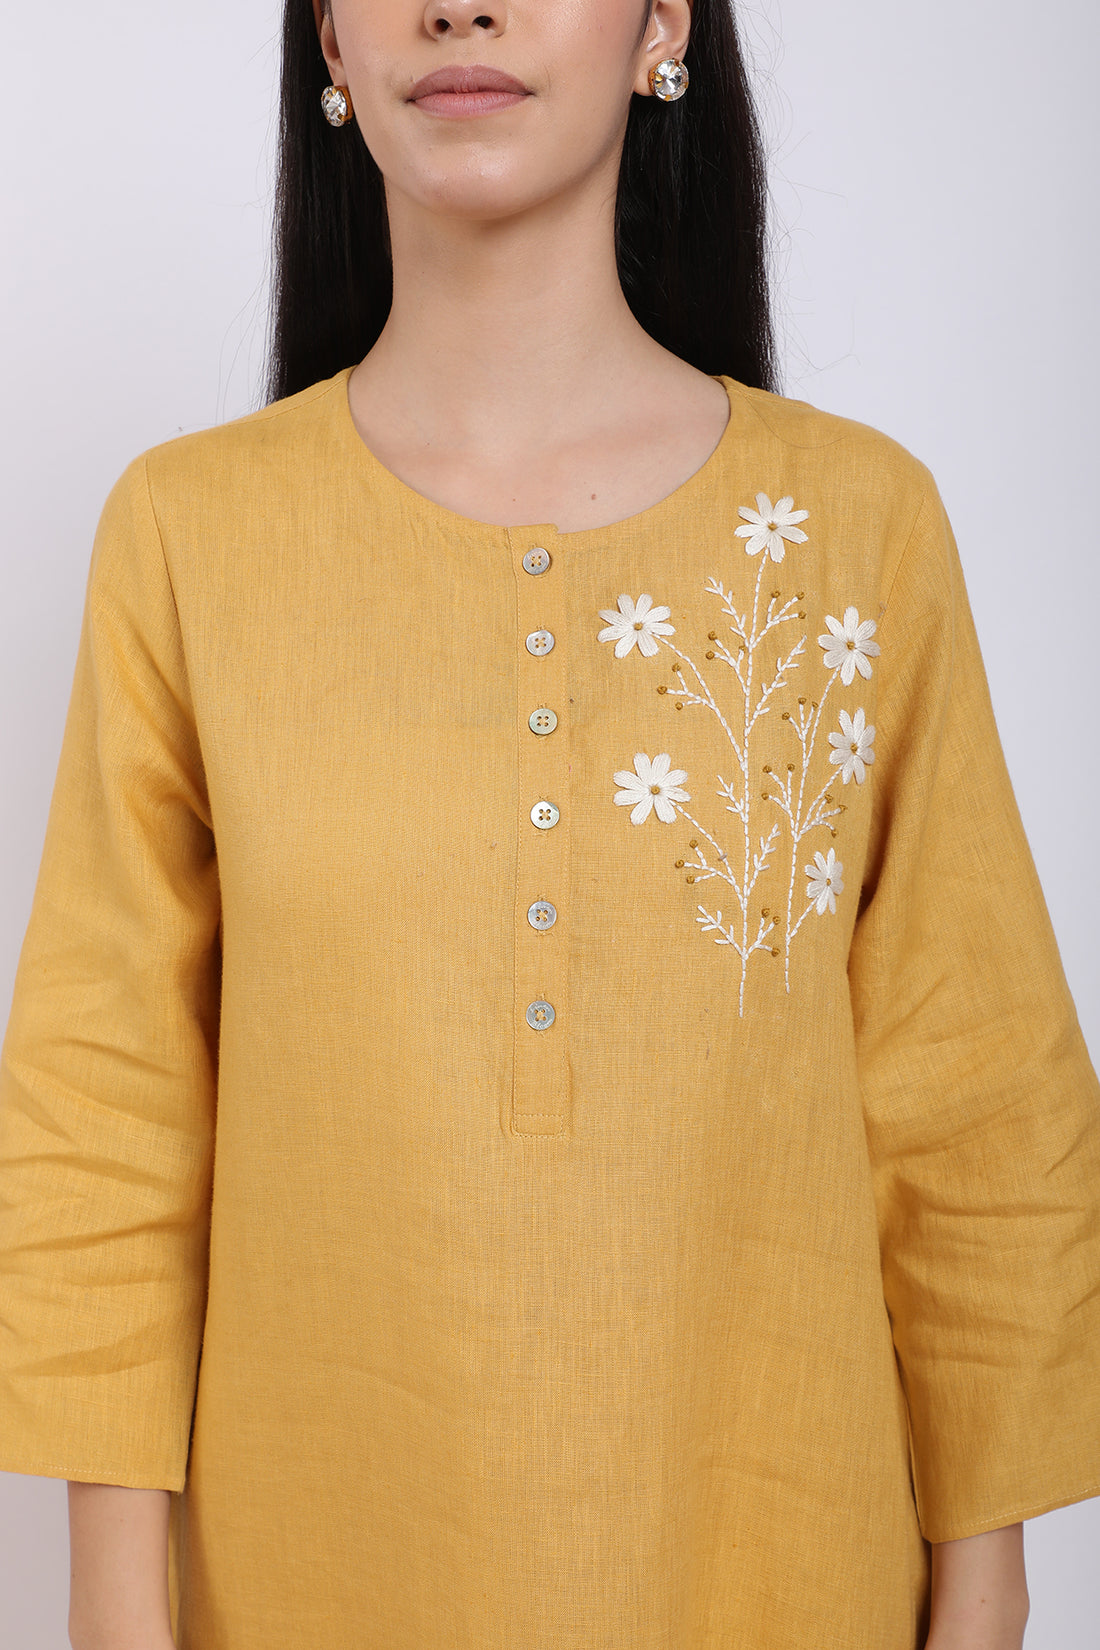 Ochre Hand Embroidered Tunic